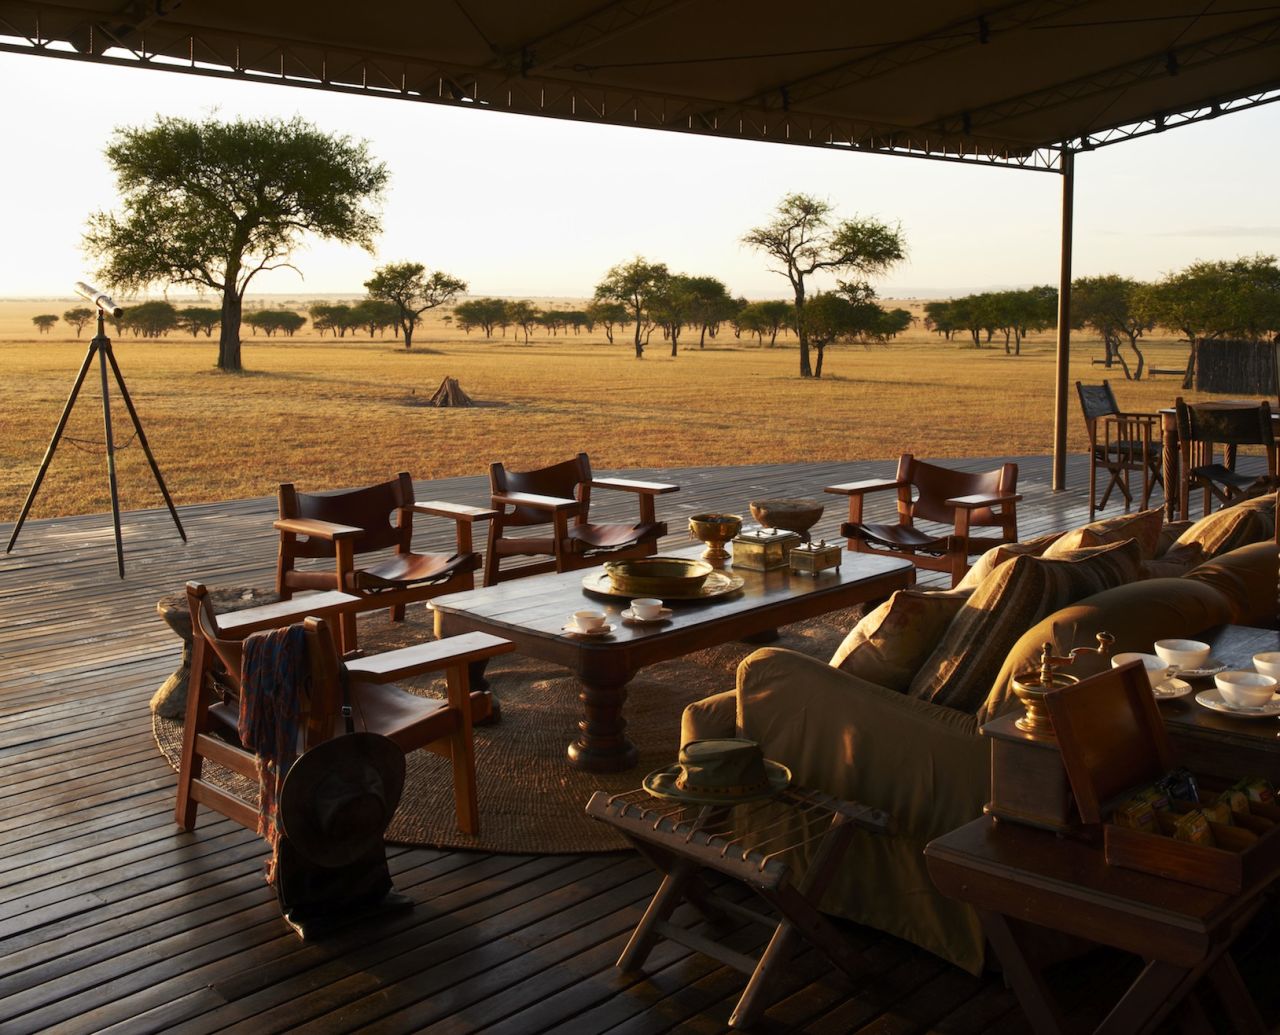 "Some of the lodges in the Serengeti ecosystem, where an American hedge fund tycoon created a private game reserve, can be described as ostentatiously opulent (a sheik would be happy to sleep in the stables, someone once observed), but the fact that the Grumeti reserve extends the viable migration area by some 150,000 hectares is one of Africa greatest recent conservation successes."